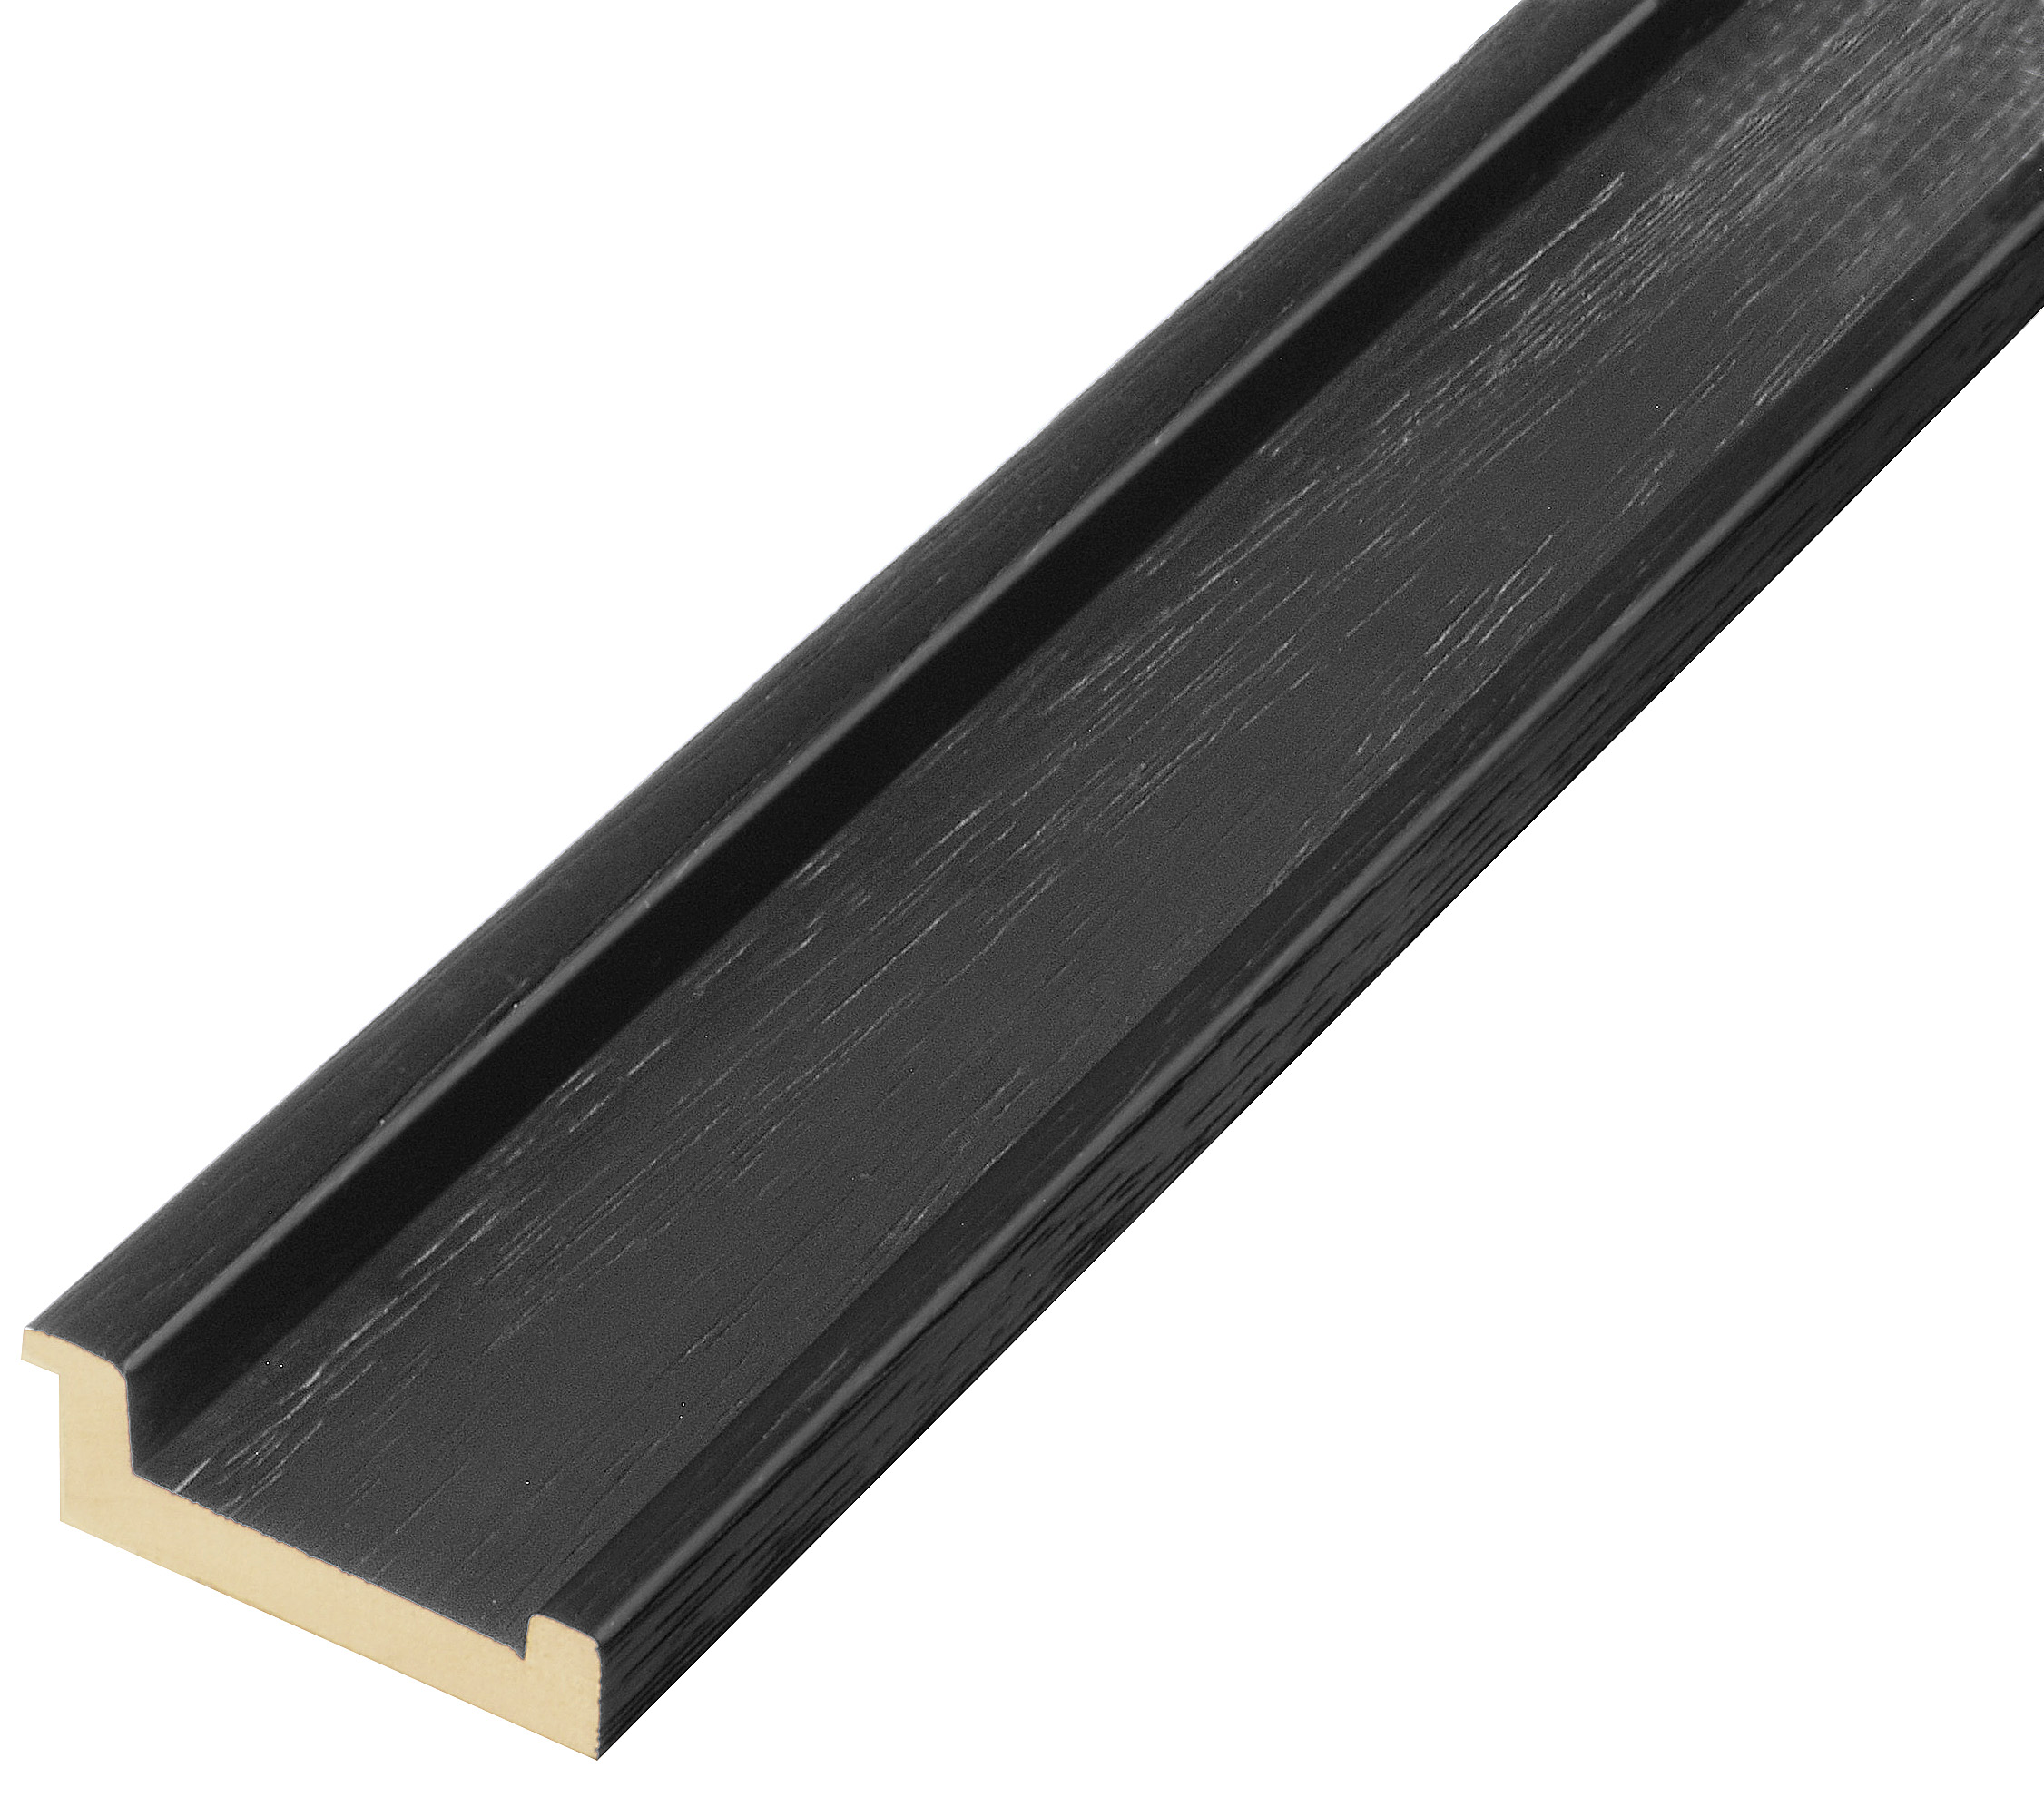 Moulding finger-jointed pine width 68mm Height 20, black finish - 571NERO